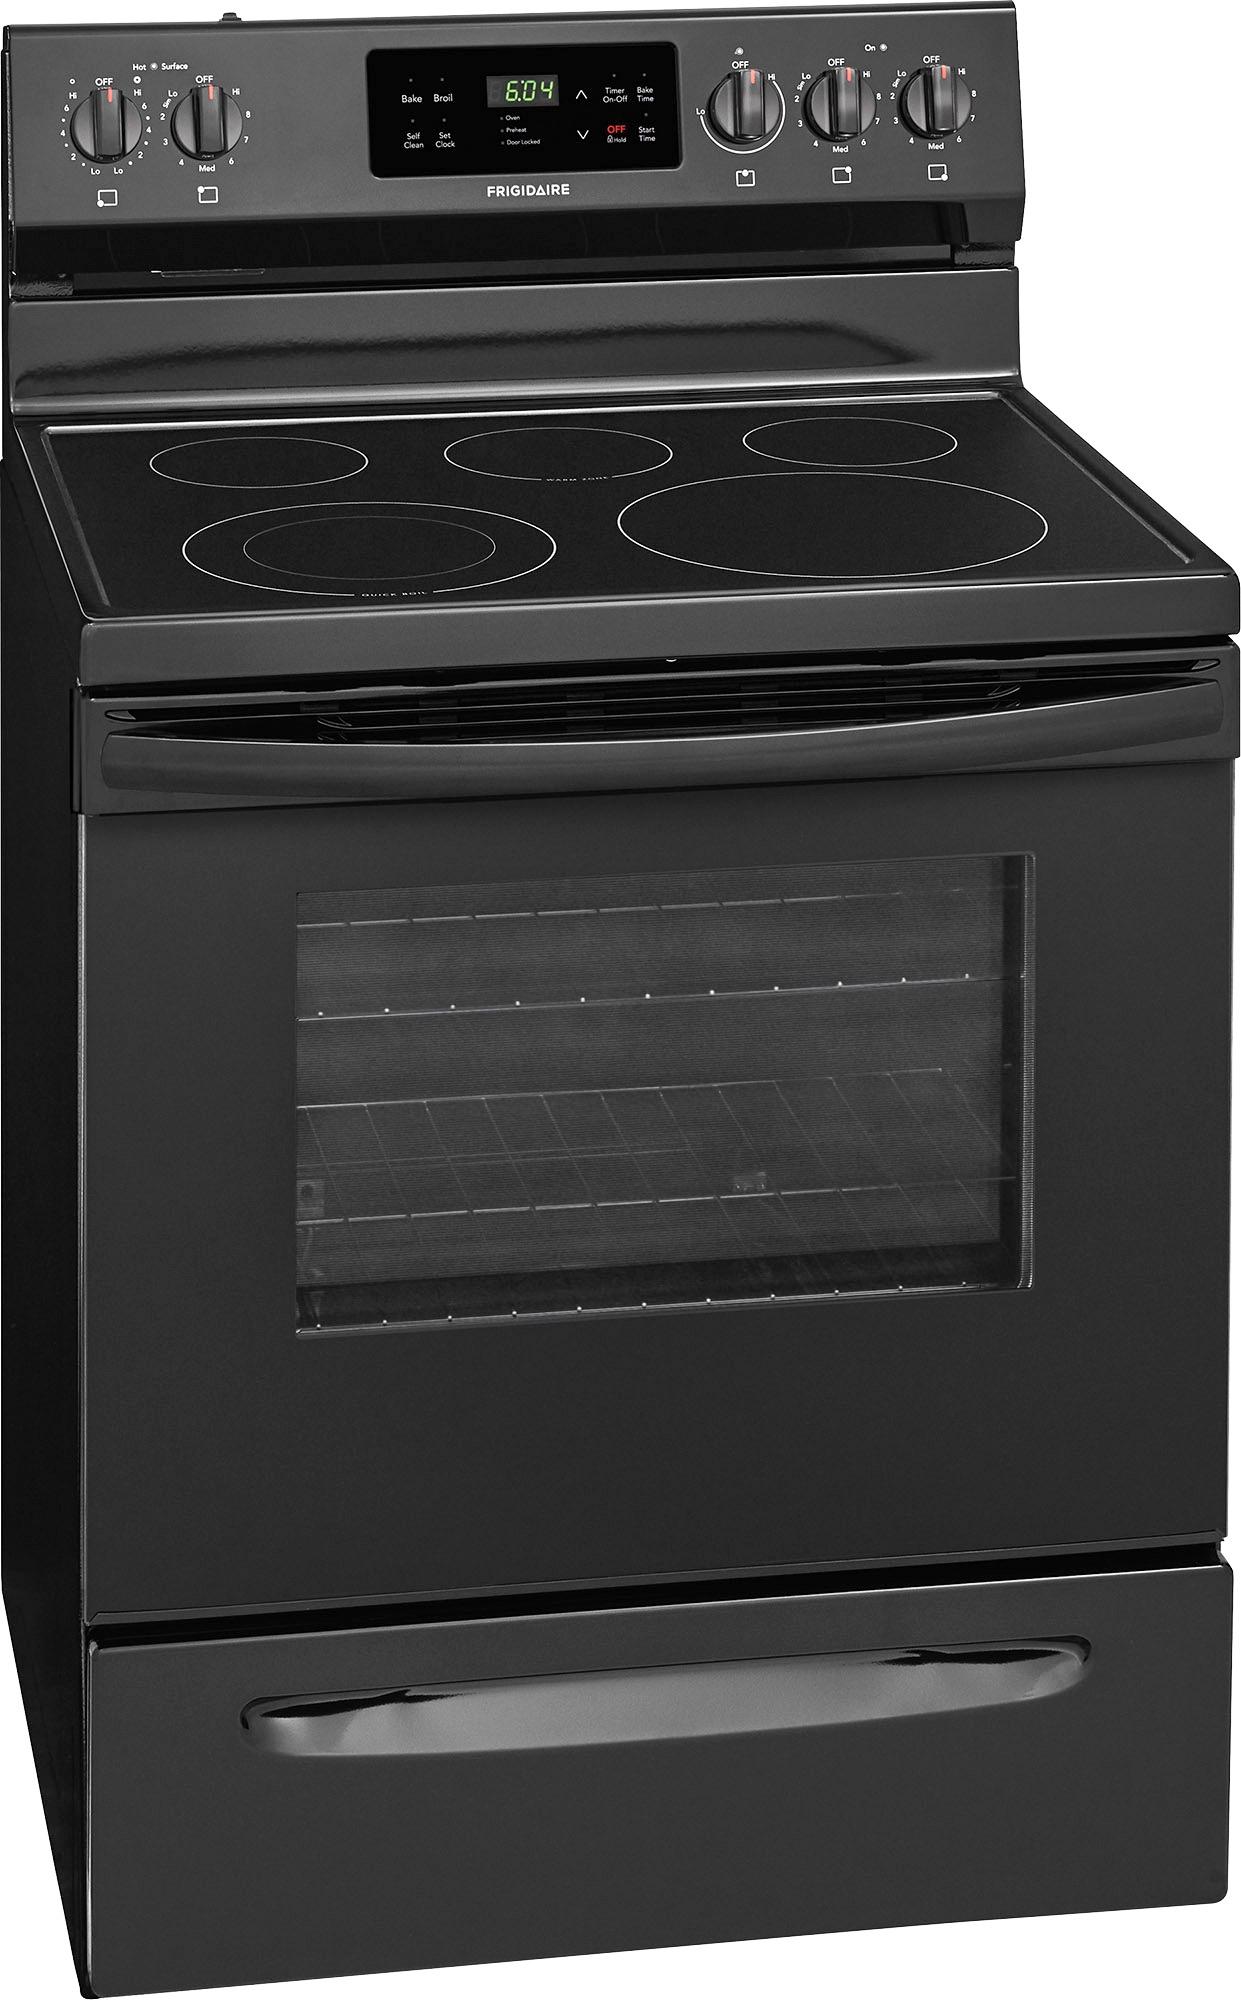 Angle View: Frigidaire - Self-Cleaning Freestanding Electric Range - Black